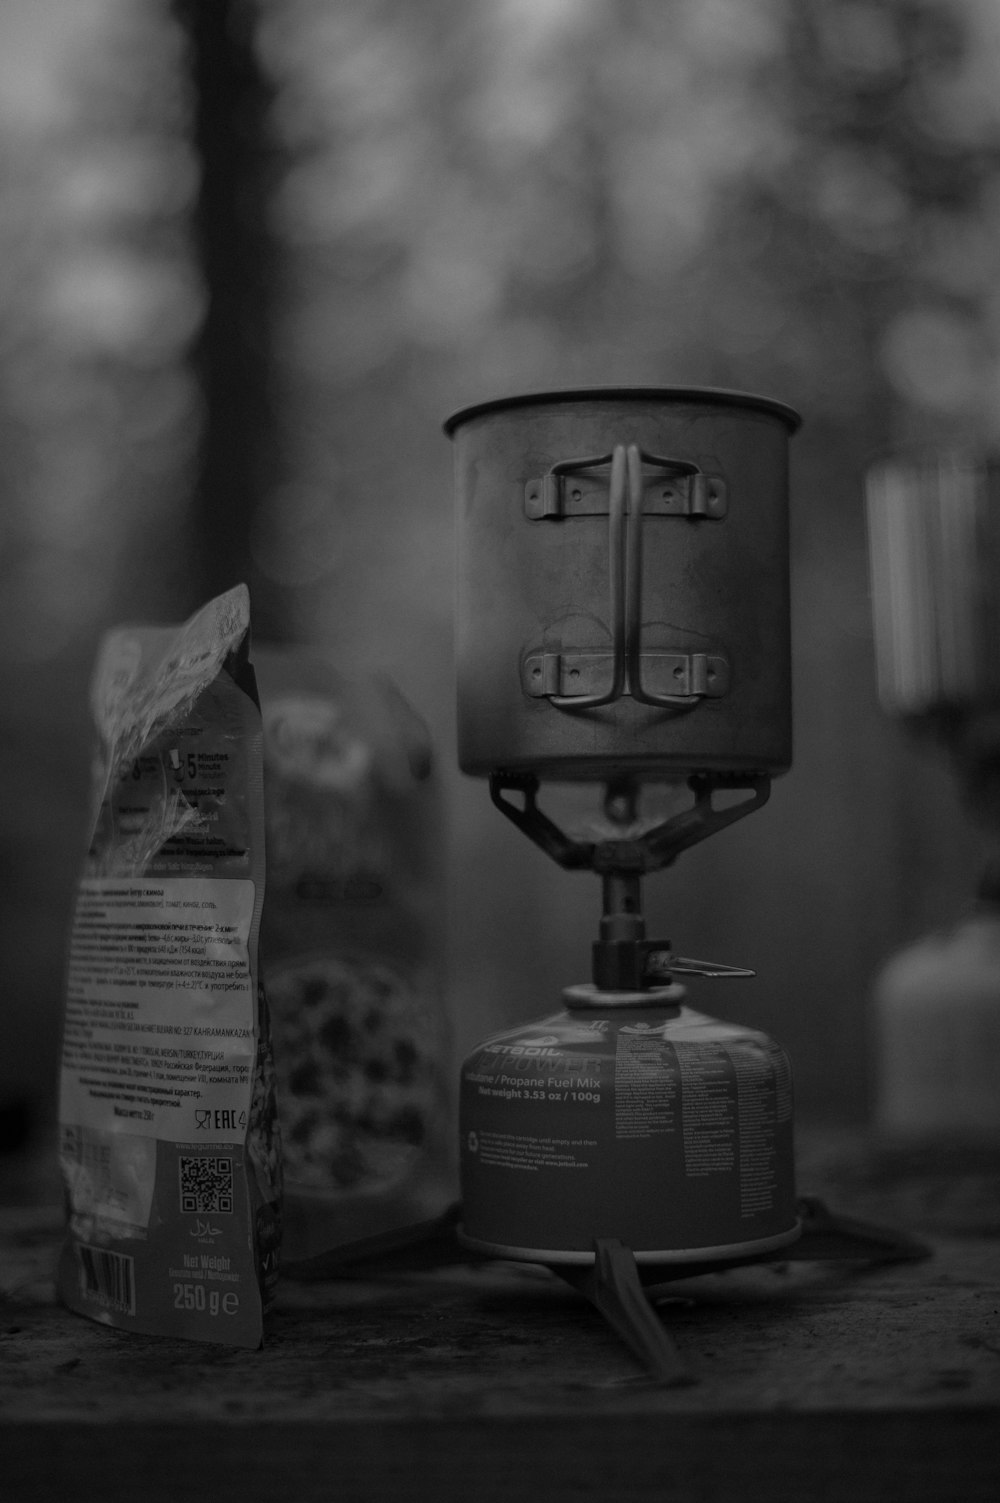 a black and white photo of a coffee maker